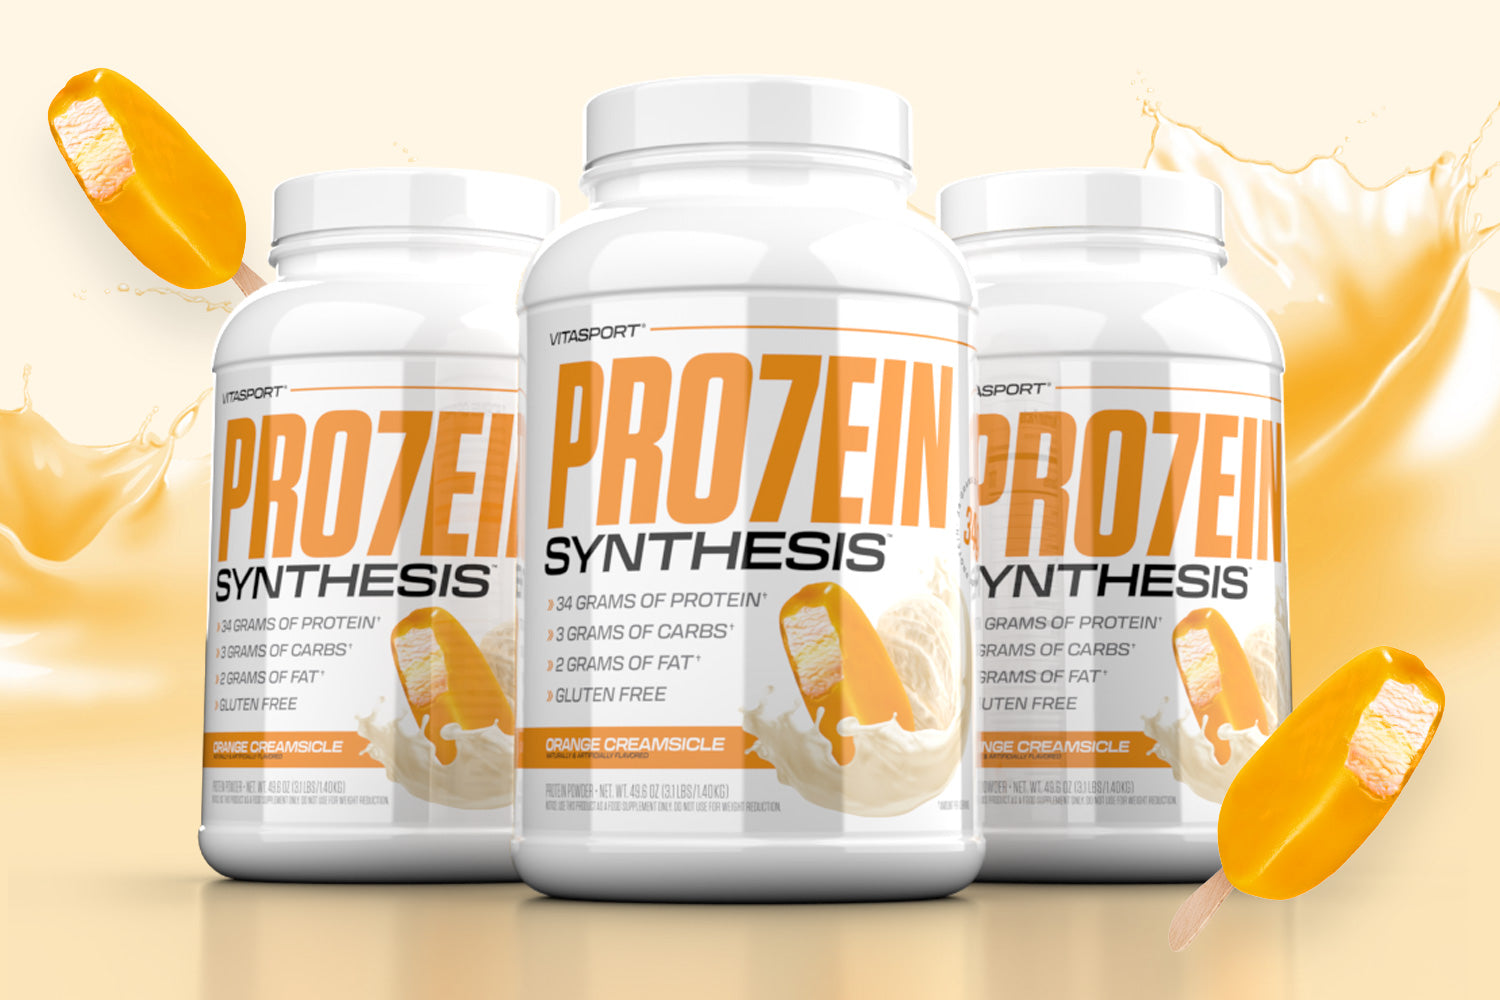 Beat the Heat – Nutrishop Unveils Nostalgic New Protein Flavor in Time for Summer